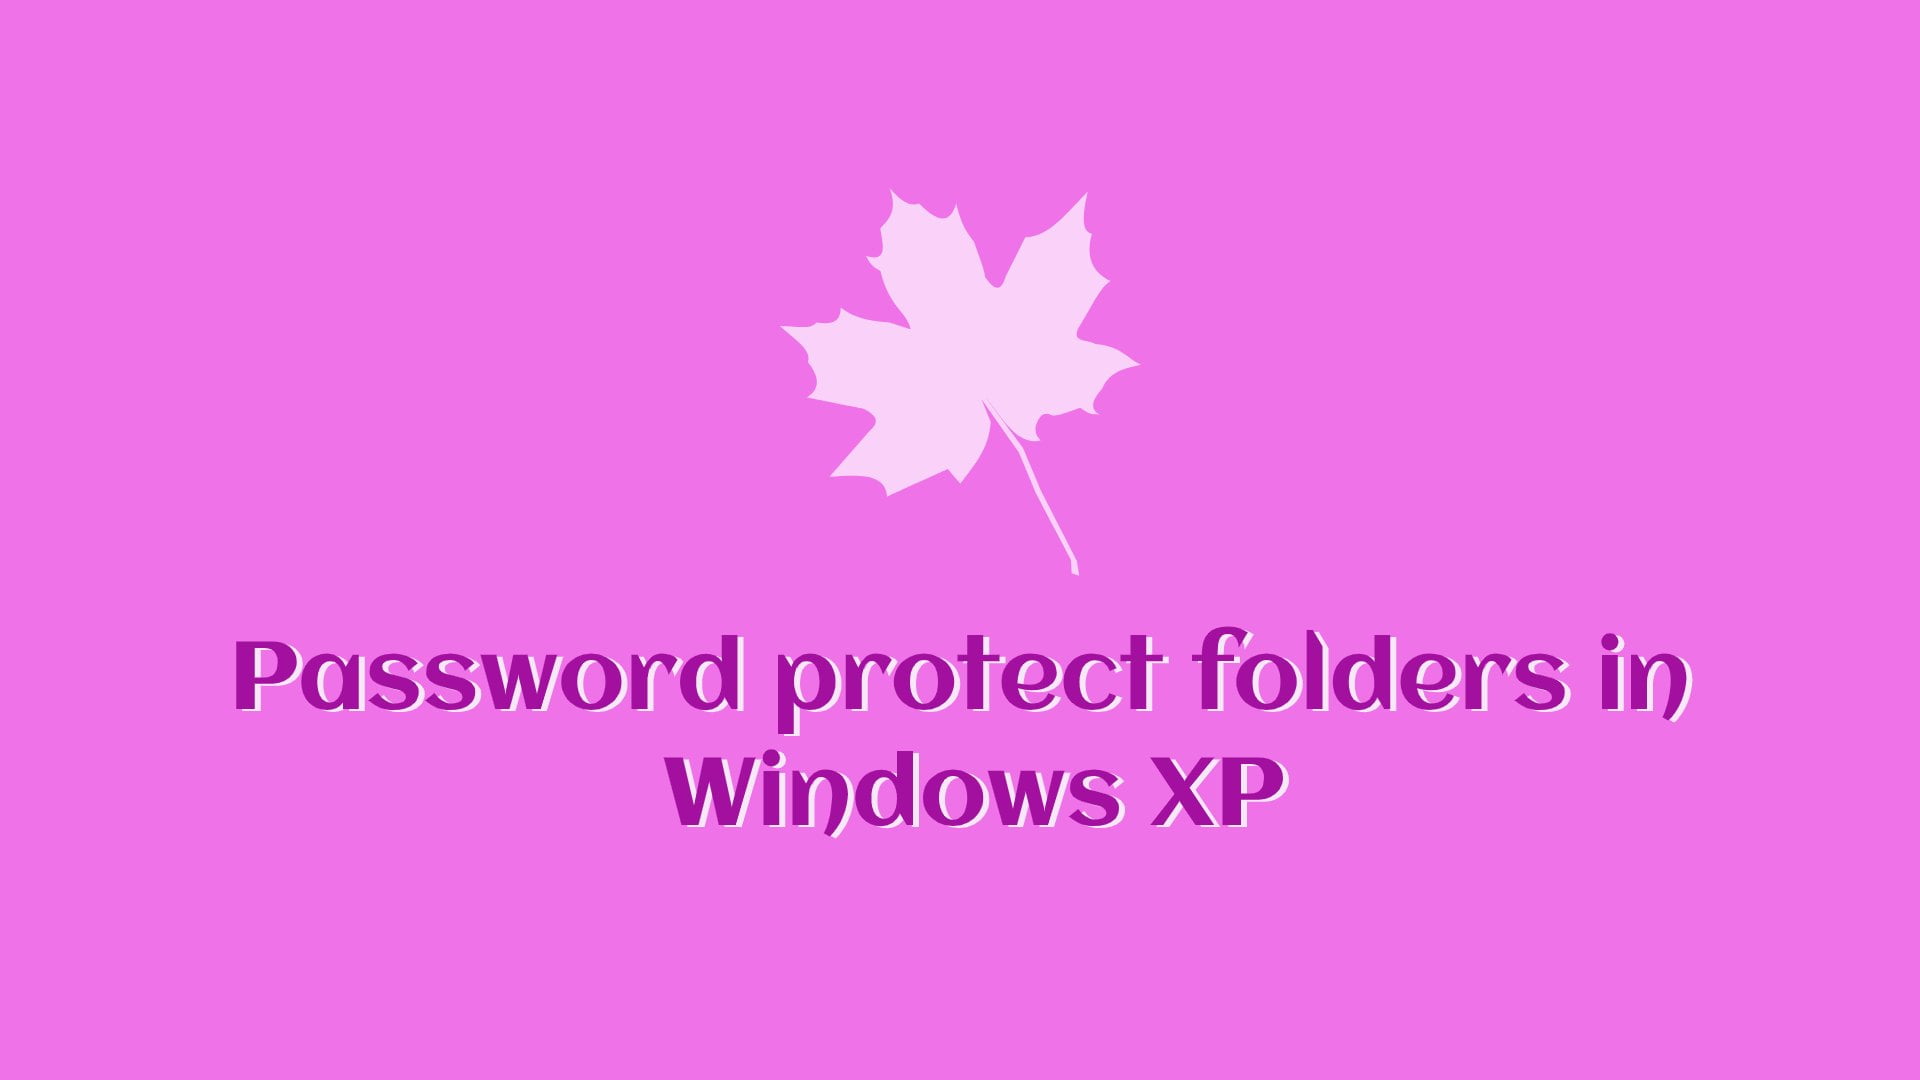 Password protect folders in Windows XP template